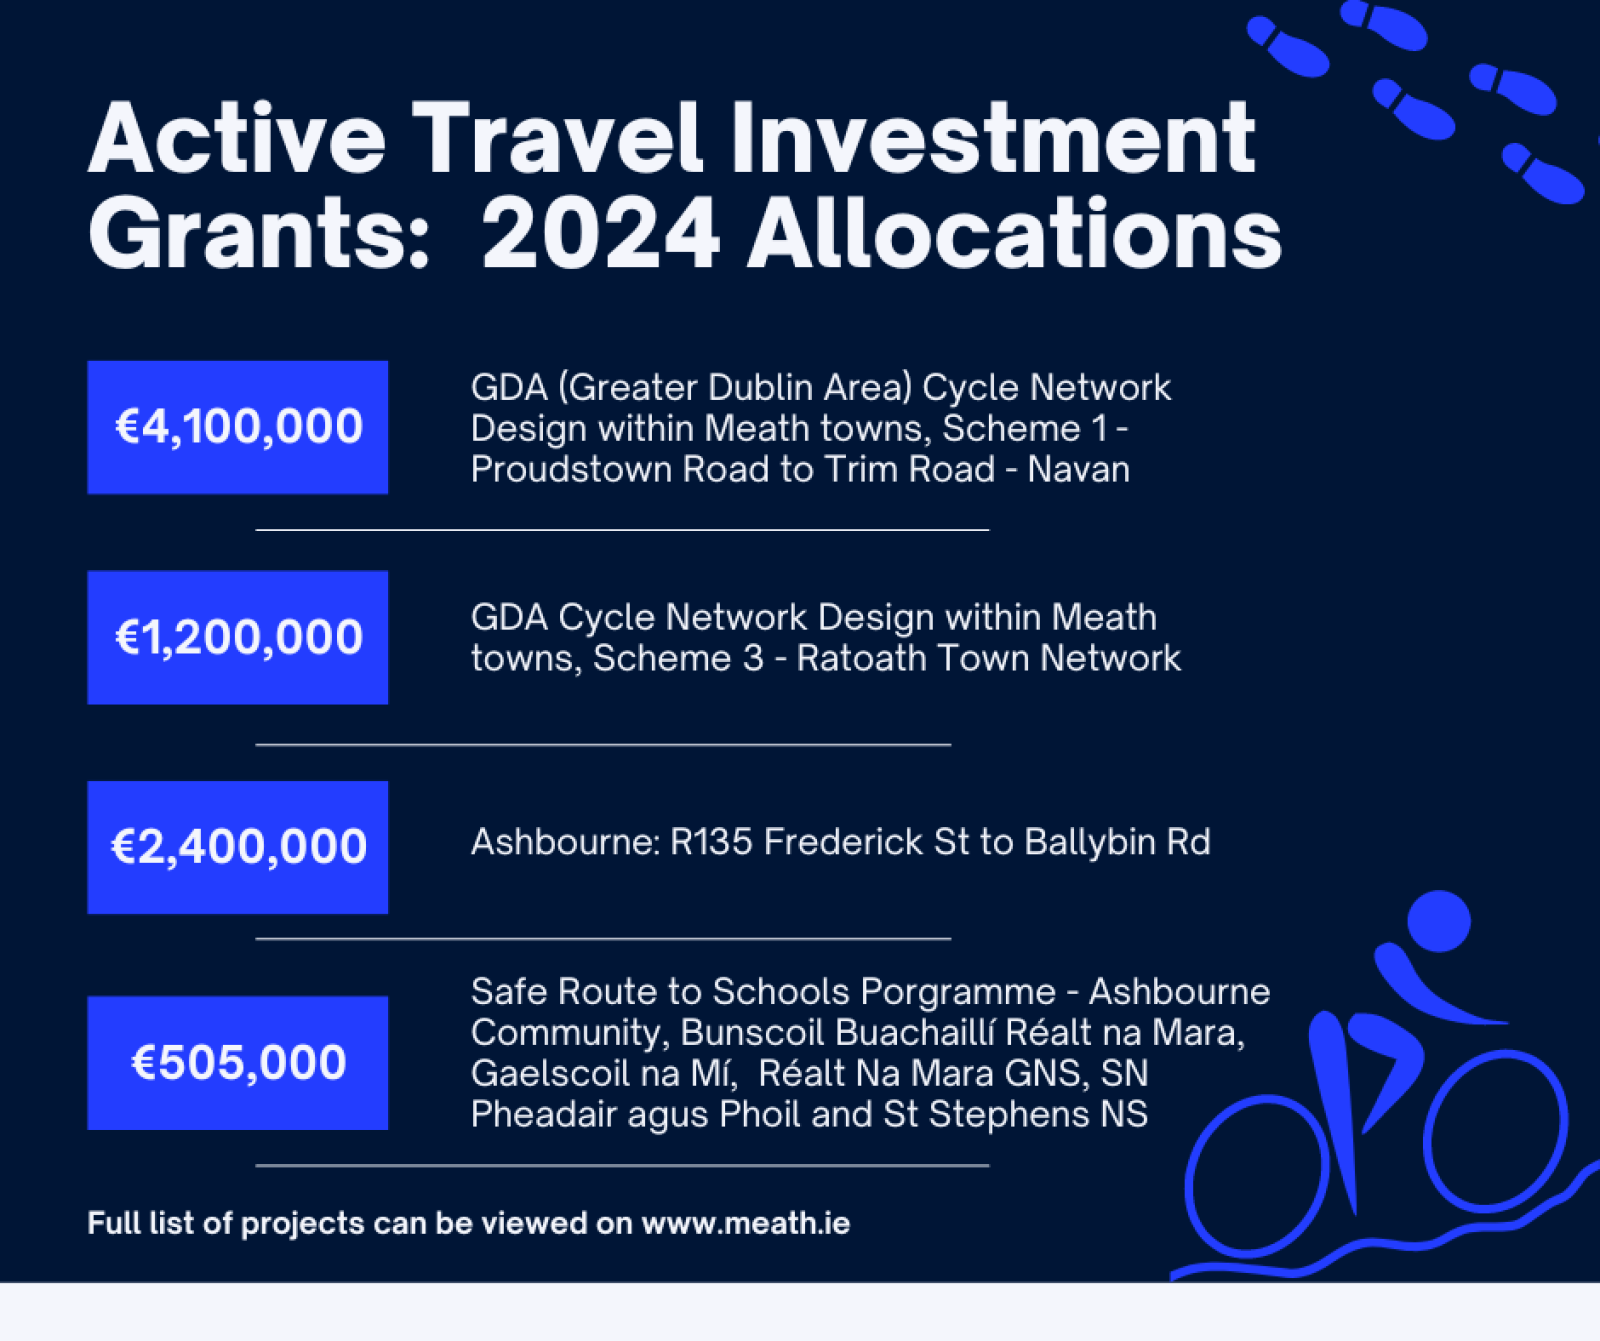 Active Travel Investment Grants 2024 Allocations